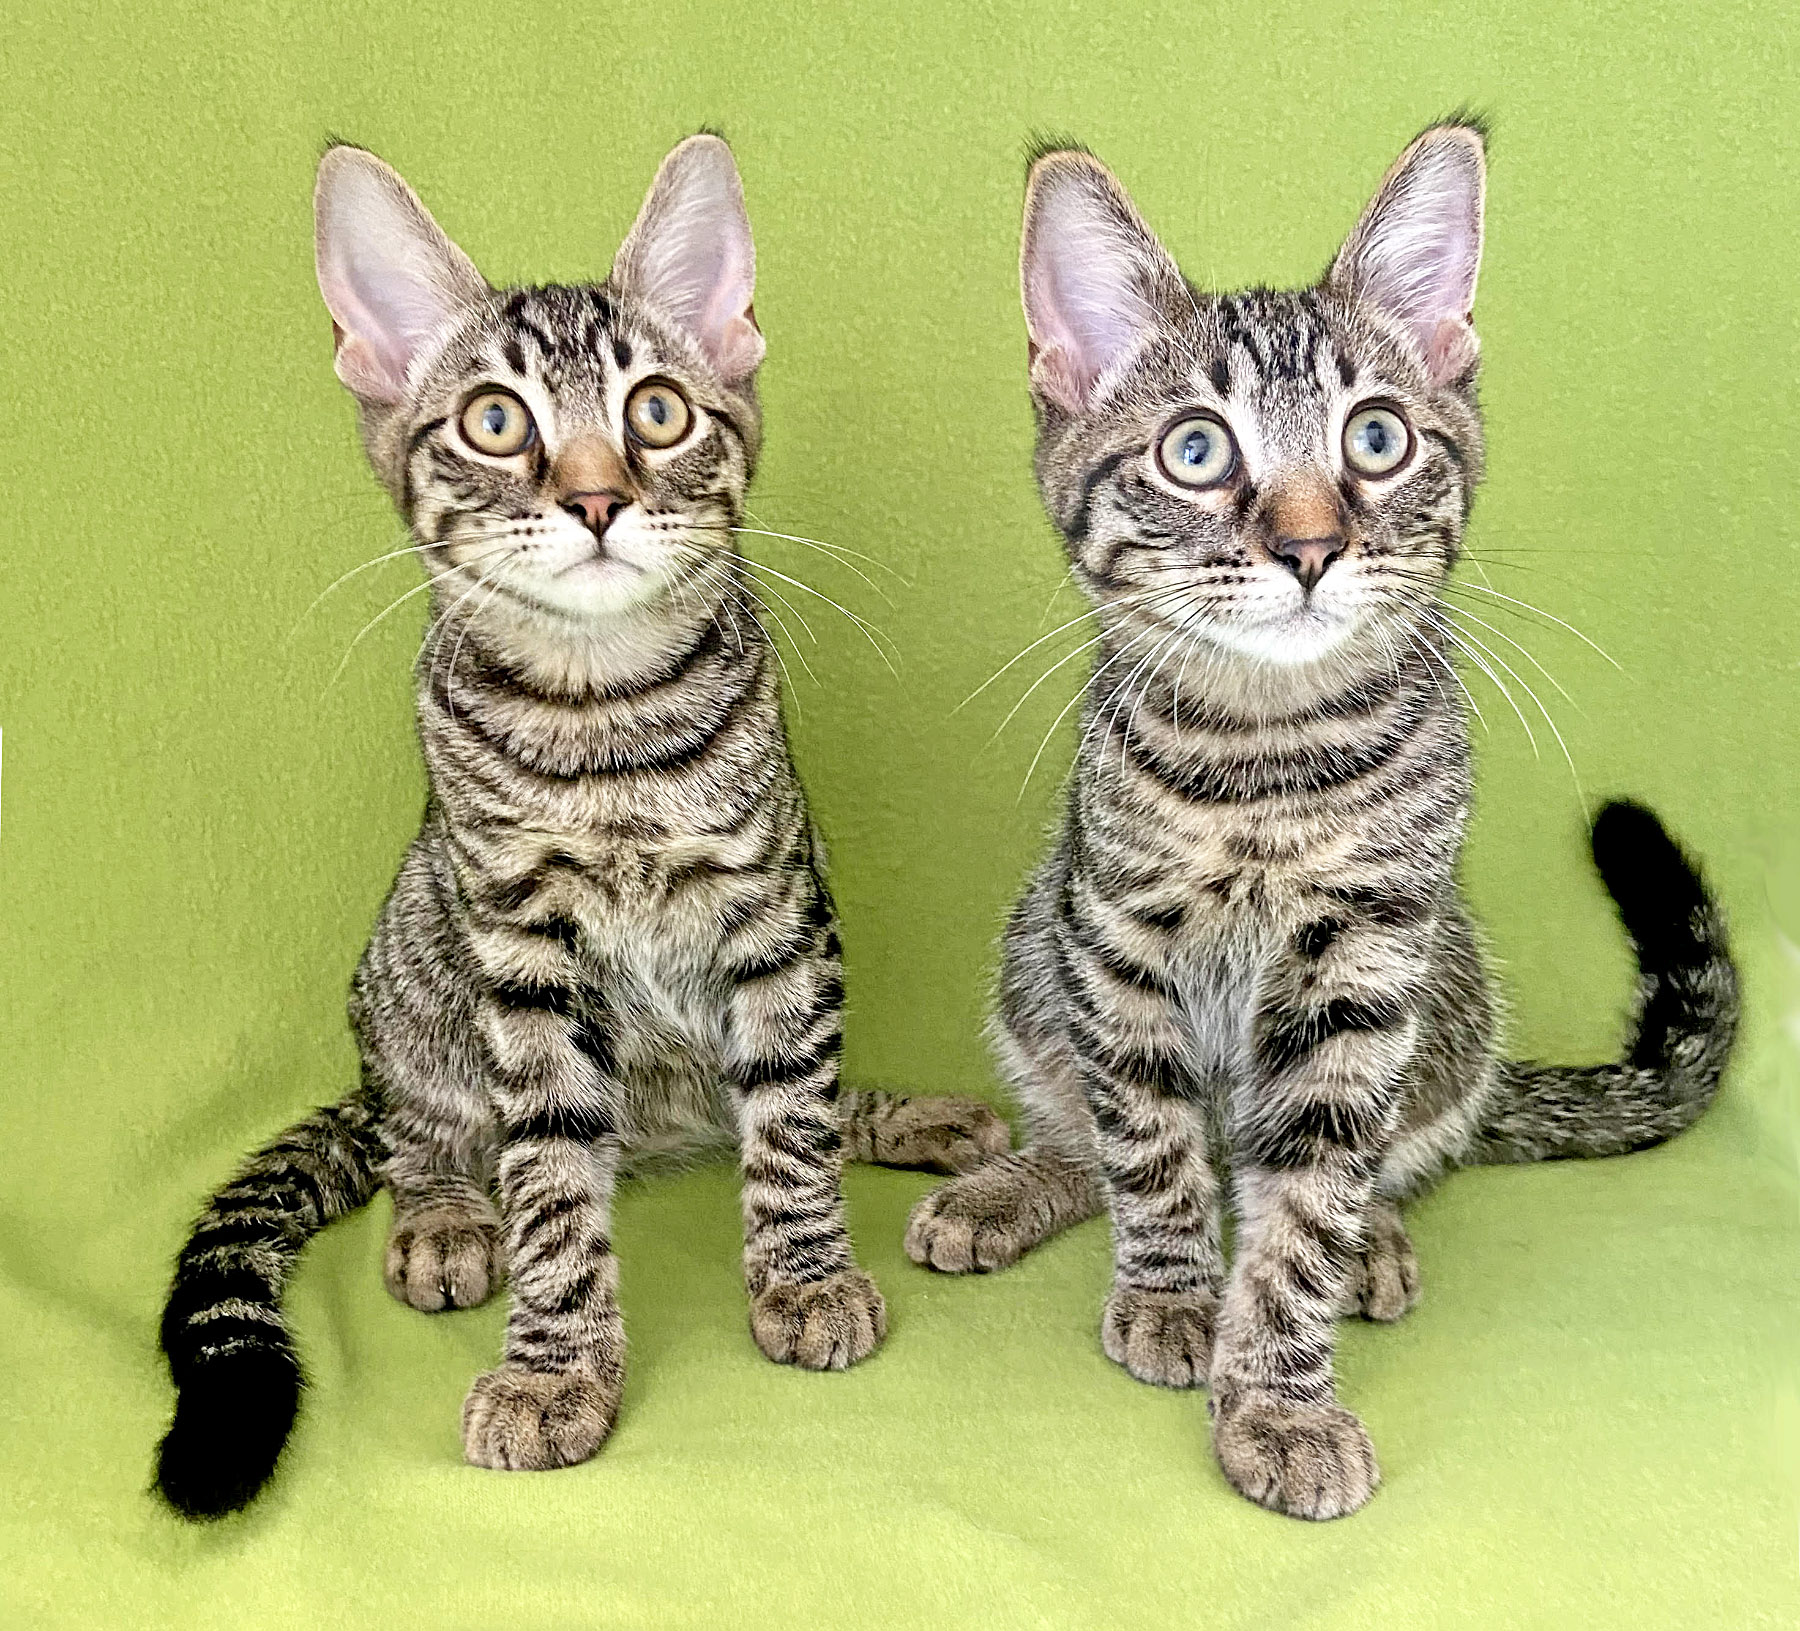 Happy Cats Haven – Pet of the Week Hi, we’re Bean & Mouse, a pair of handsome kitten brothers looking for our furever home together! Don’t let our diminutive names fool you — we’re big on playtime with games like fetch, chase and pounce! Once playtime is over, our gentle loving side comes out and we’ll settle down with you for some brushes and kitty kisses. We’ll do best in a home with older kids and other feline friendly cats; no dogs, please! We qualify for the buddy discount, making our adoption fee just $210 for both of us, which includes our neuters, vaccinations, microchips, food and litter starter kit, and a free well-kitty checkup. Are you ready for double the fun?!? Happy Cats Haven: 719-362-4600, 327 Manitou Ave. Adoptions by appointment only until further notice.www.HappyCatsHaven.org, www.Facebook.com/HappyCatsHaven.